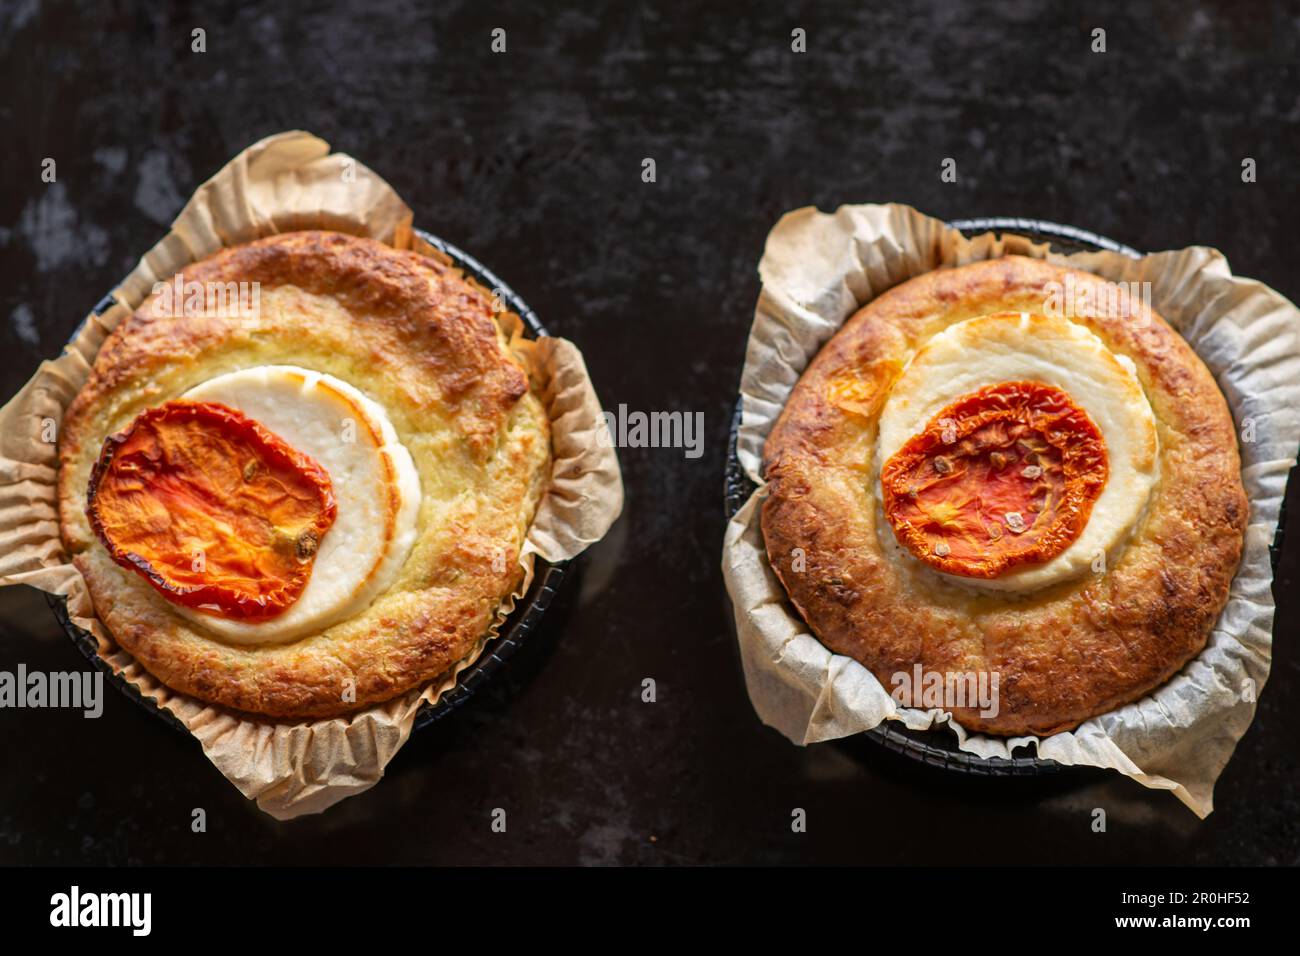 casserole with cheese and tomato. Two servings of round casseroles on a dark background. View from above. Stock Photo